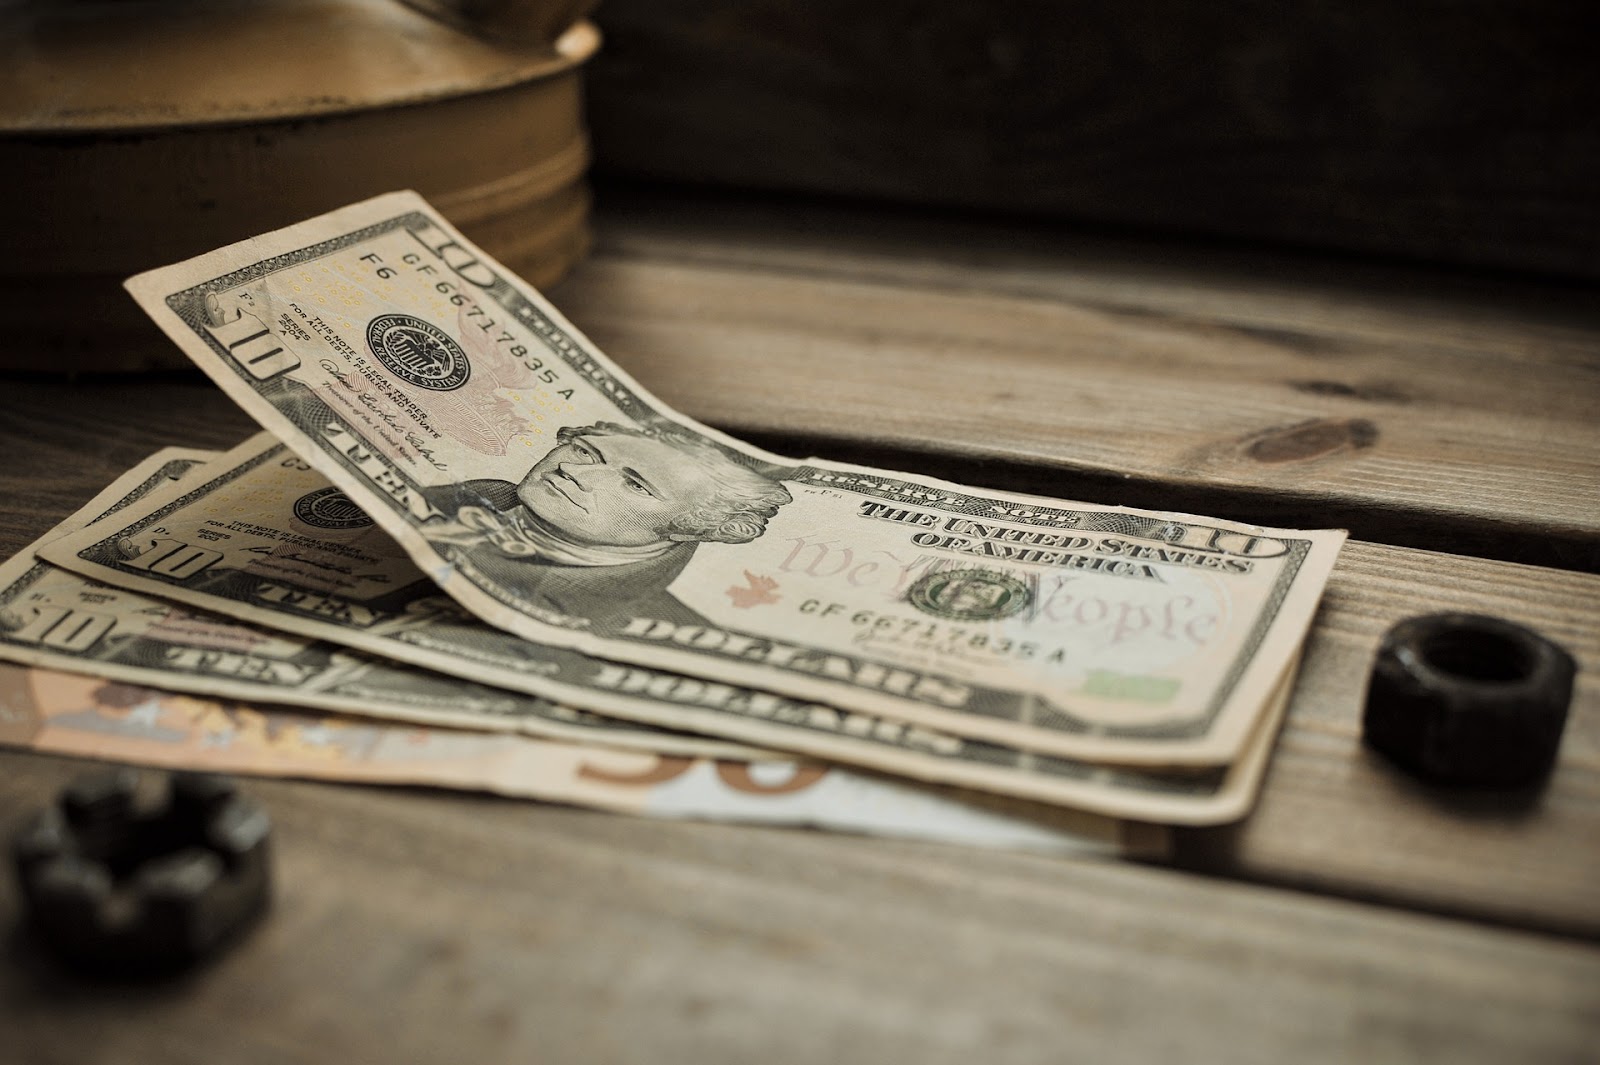 An image of three $10 bills on a slatted wooden table.